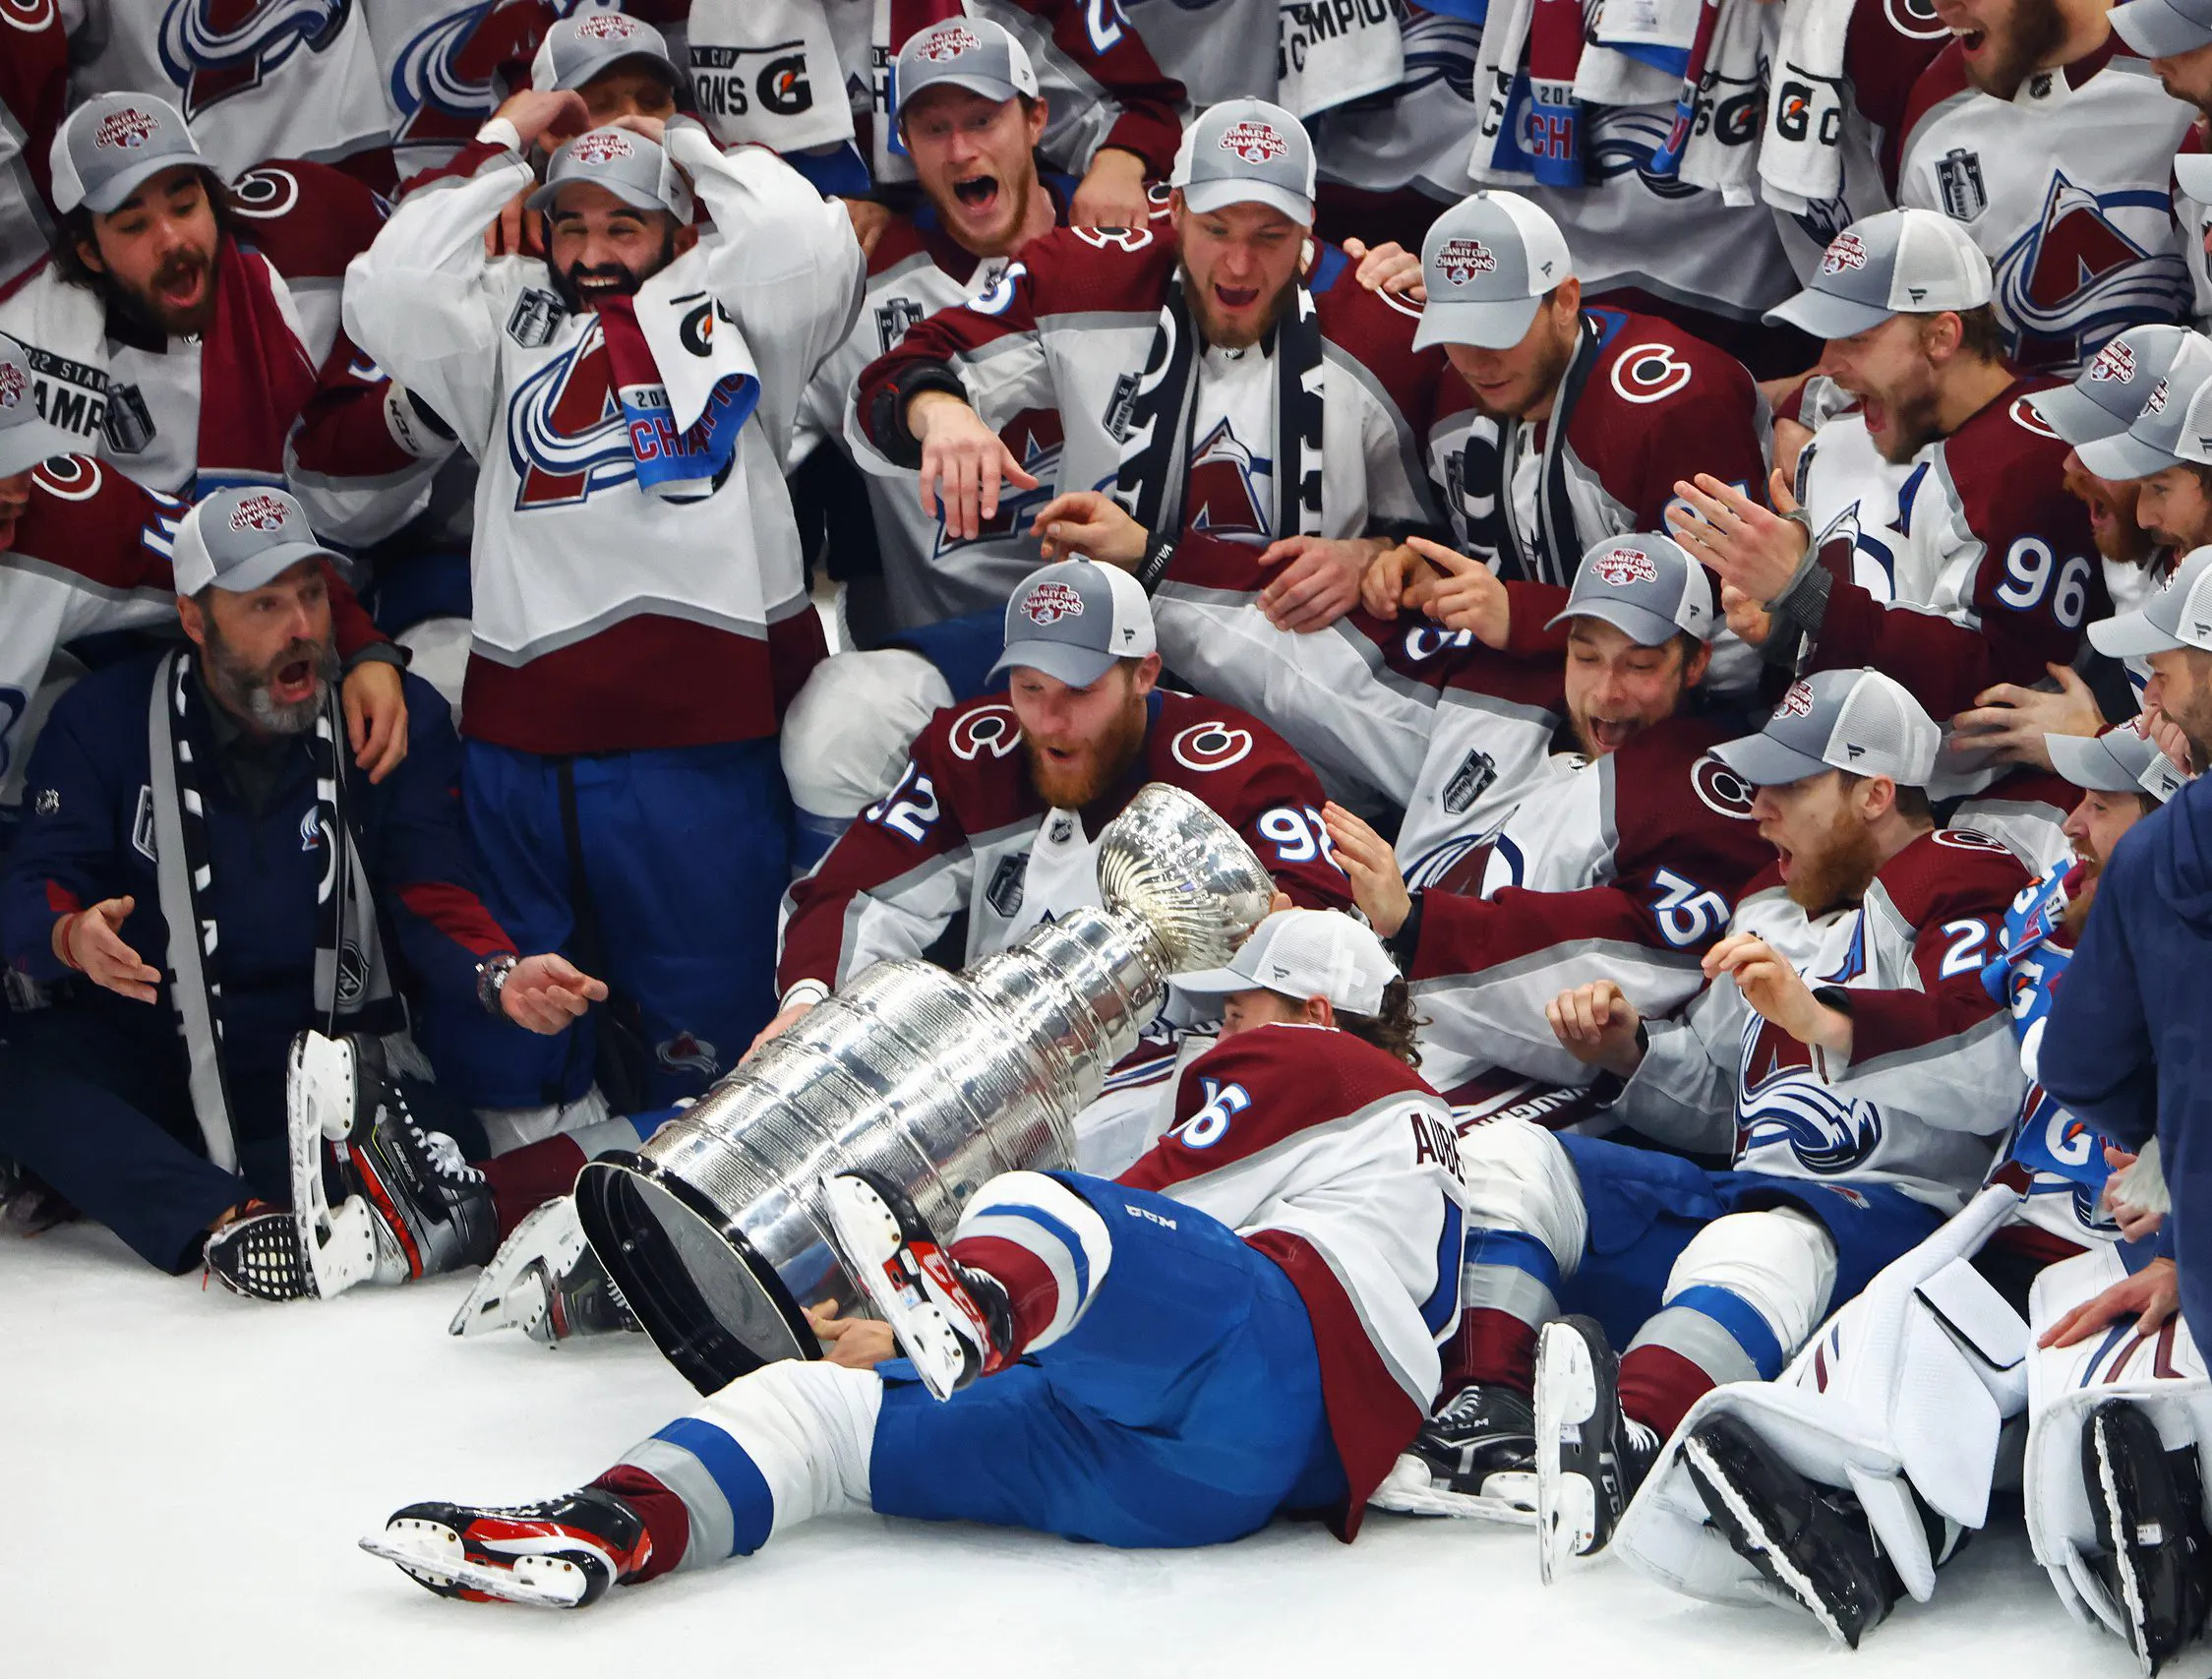 ‘There’s a dent at the bottom already’: The top quotes from the 2022 Colorado Avalanche Stanley Cup celebration